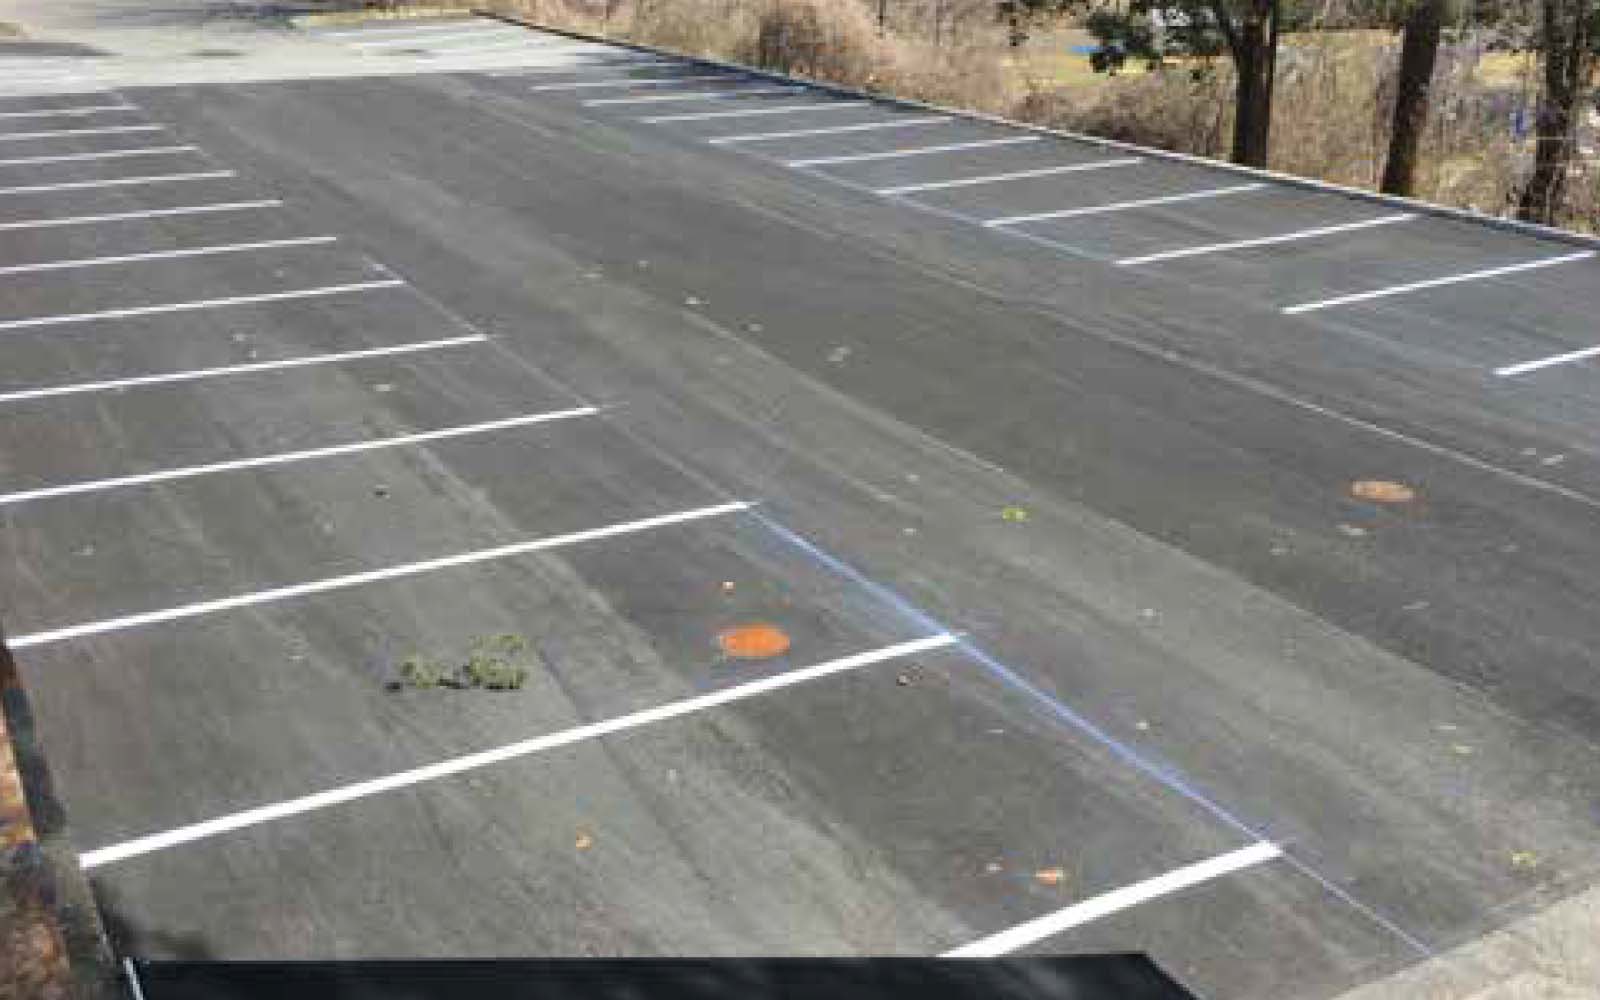 Case studies - Results from the new stormwater storage system under an office complex parking lot in Harrison, NY